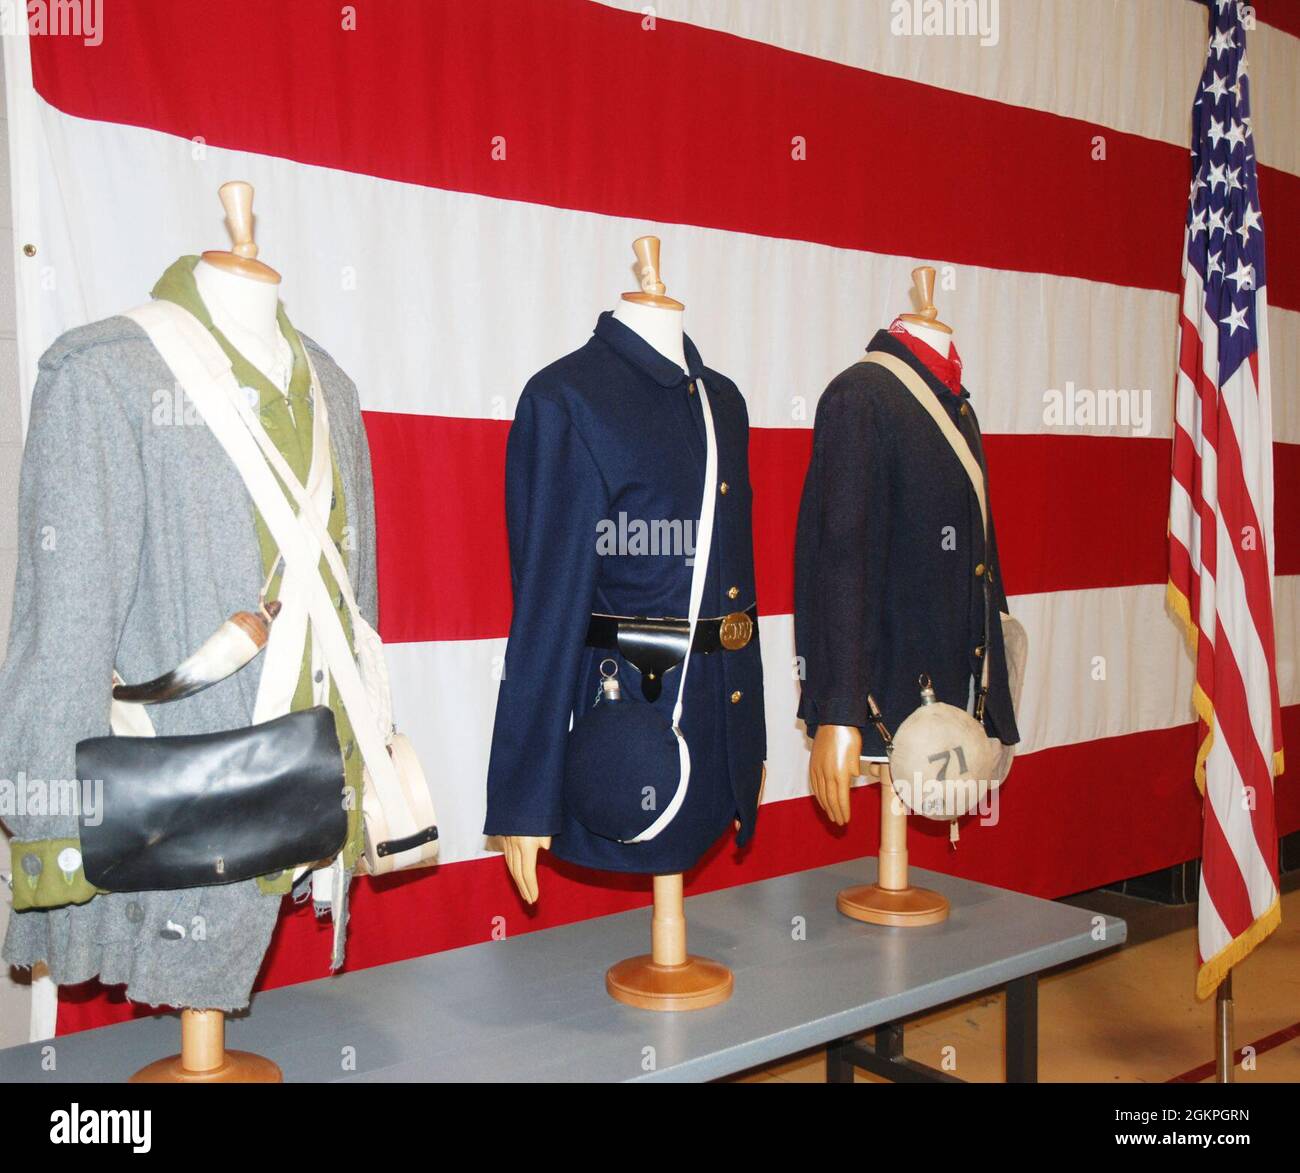 A collection of historic uniforms worn by the New York Army National Guard during the American Revolution, the Civil War and the Spanish American War posed to celebrate the 246th birthday of the United States Army on June 14, 2021, during a ceremony held at New York Army National Guard headquarters in Latham, New York. ( Stock Photo